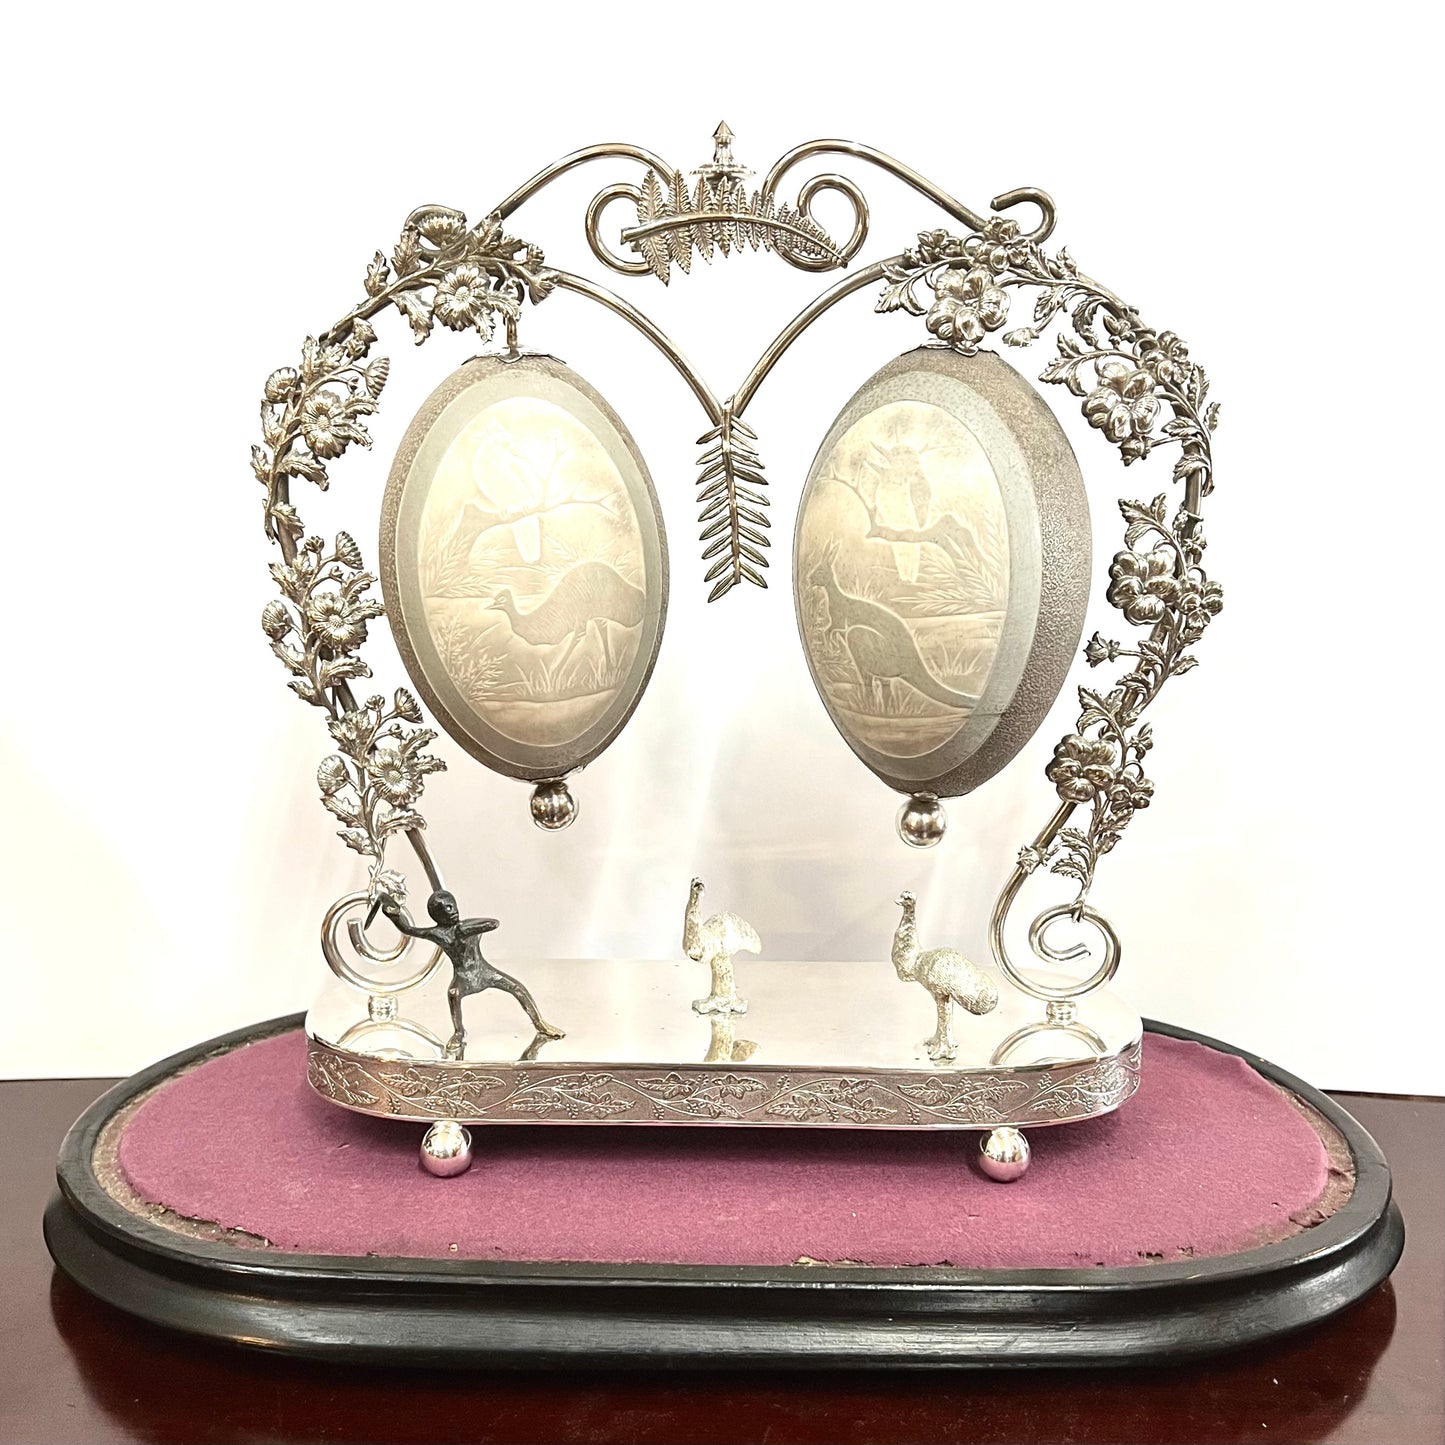 Exceptional early Australiana late 19th century silver plated centrepiece with double mounted and carved emu eggs